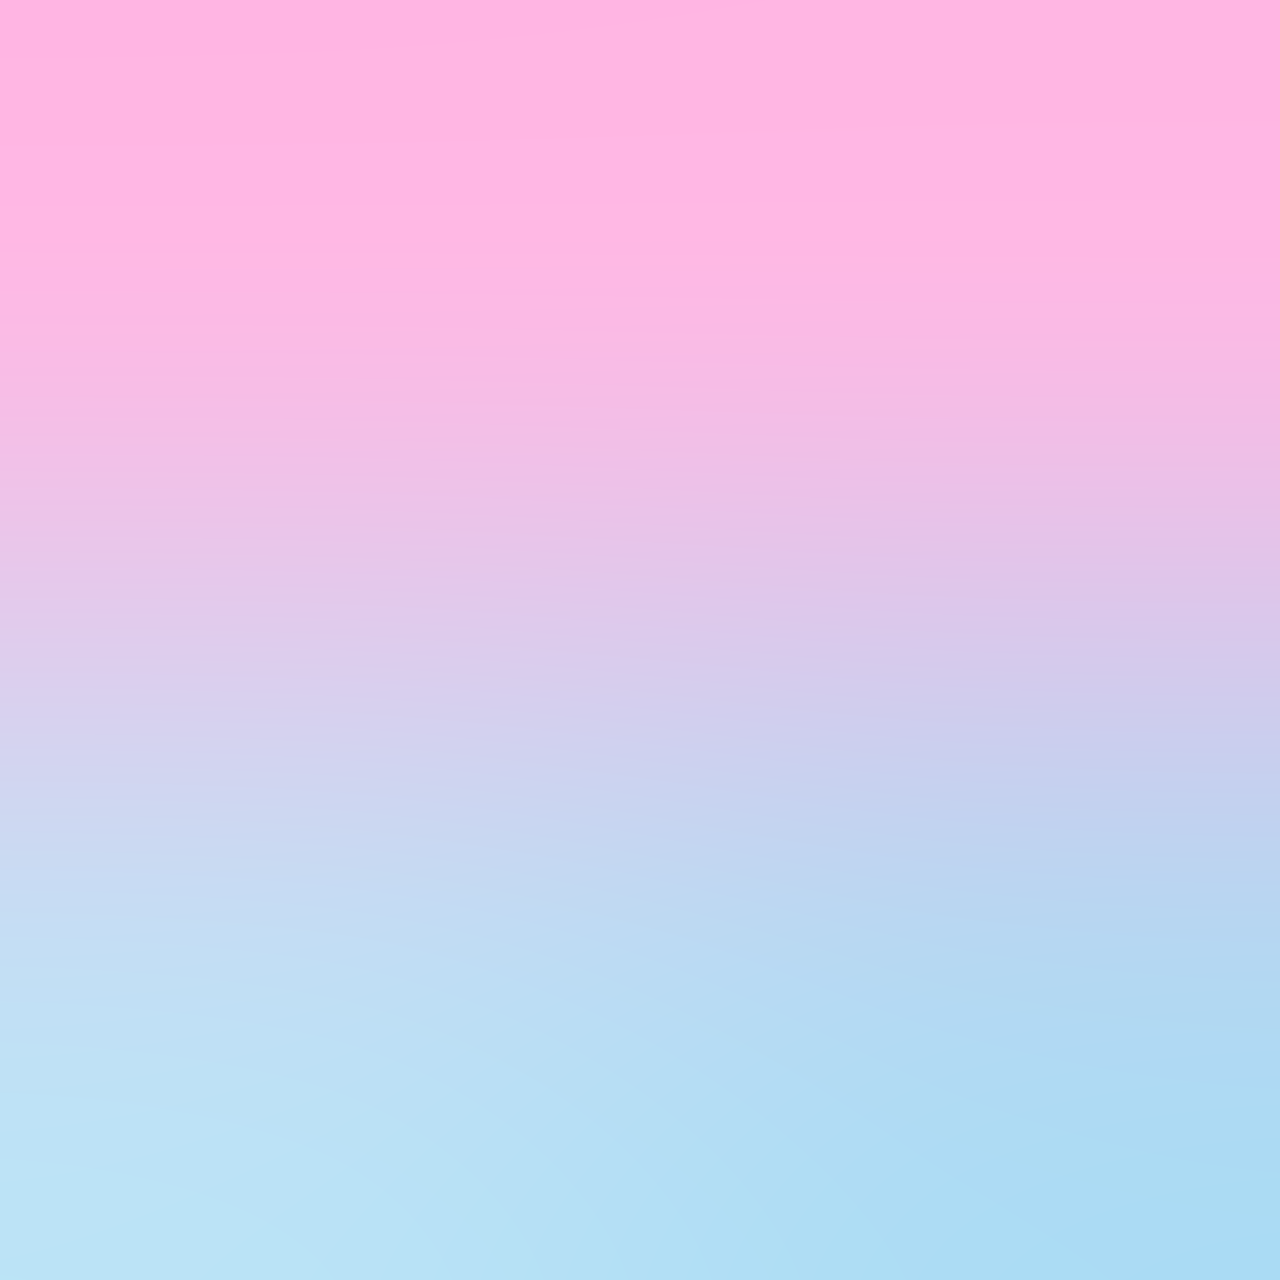 Abstract, Background And Blue - Pastel Background Pink And Blue - 1280x1280  Wallpaper 